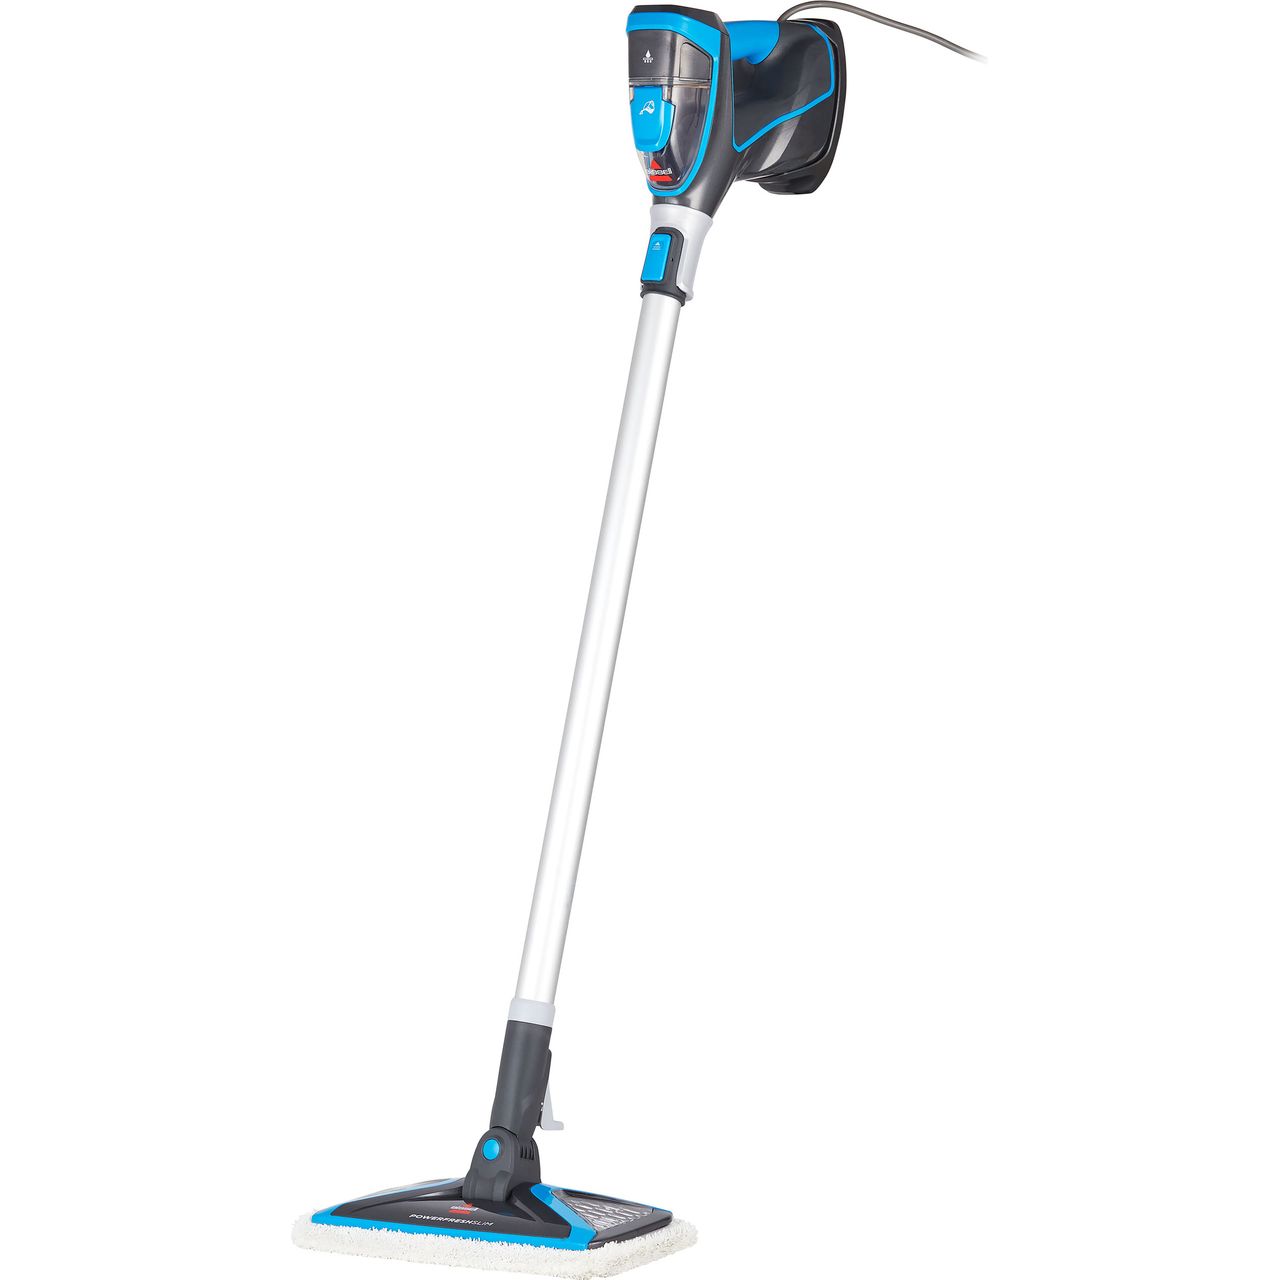 Bissell 2234E Steam Mop with Detachable Handheld and up to 15 Minutes Run Time Review